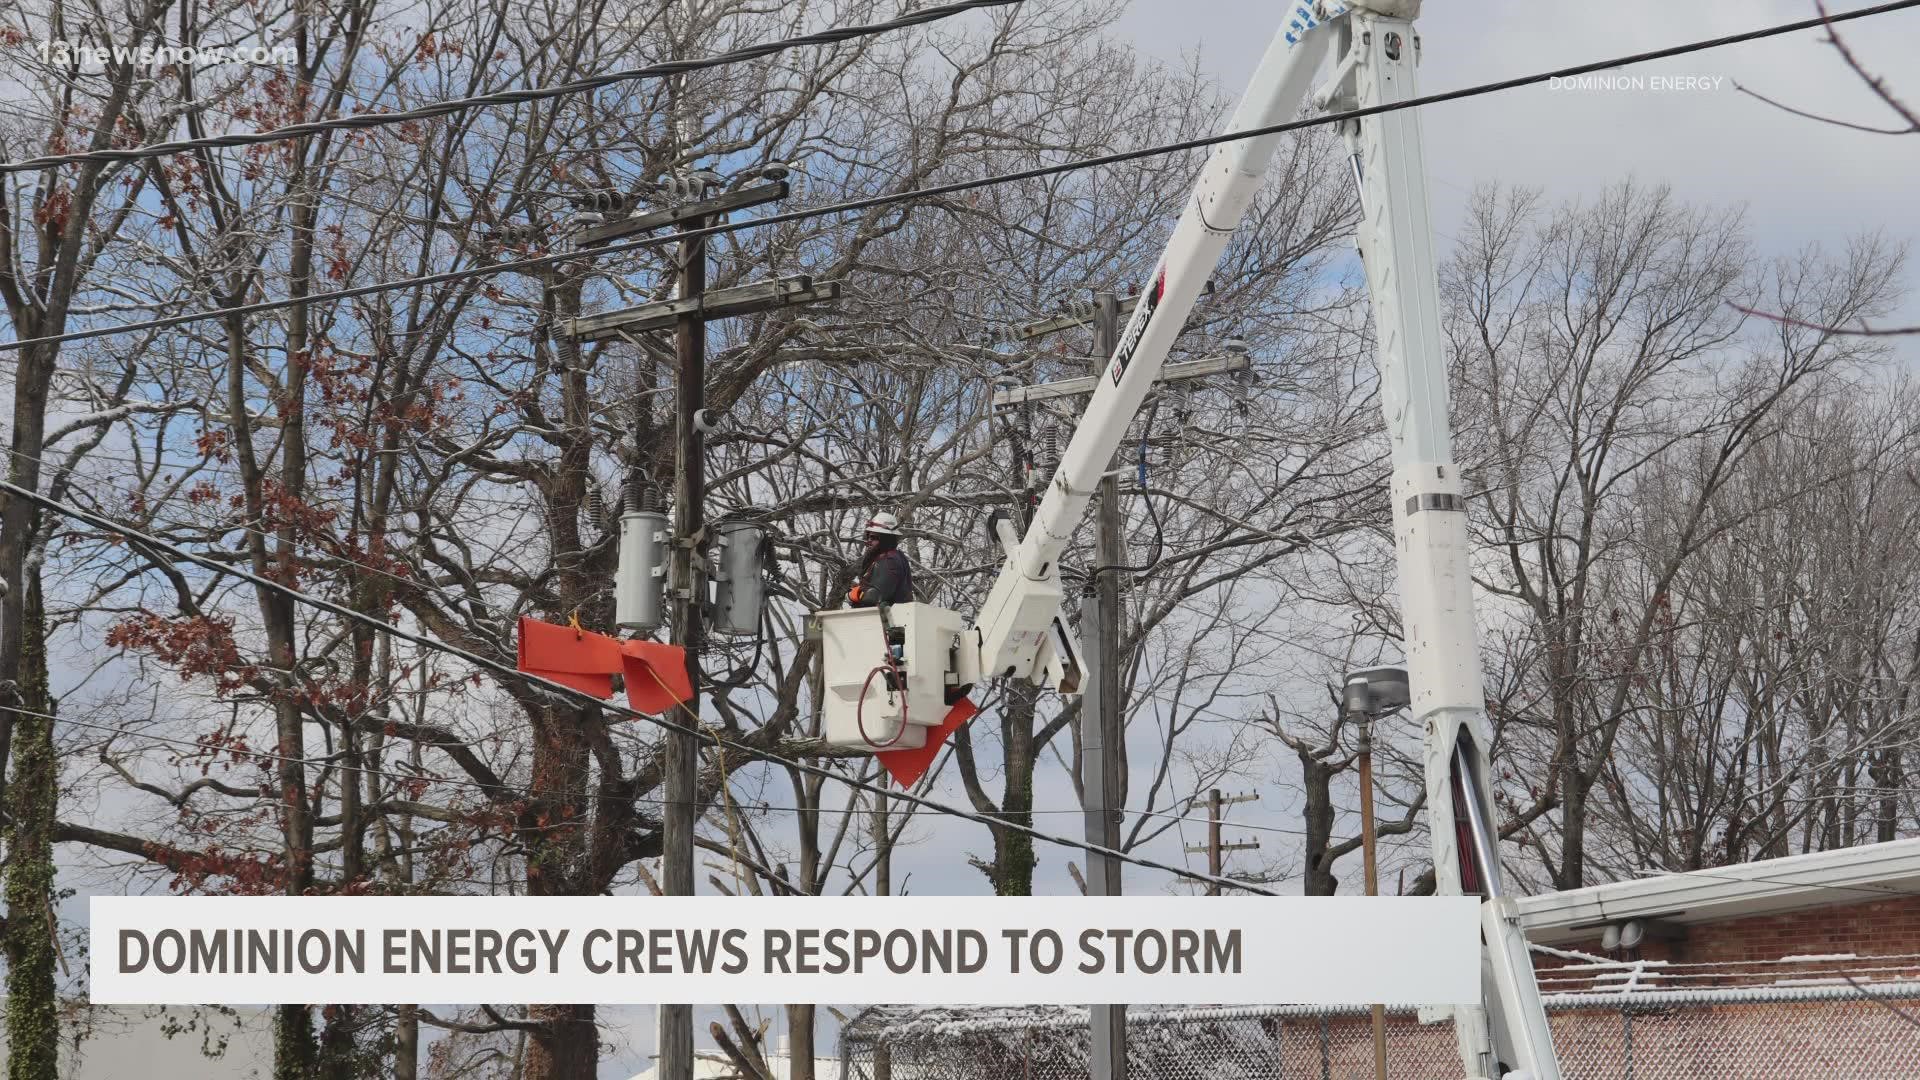 Here's what's going on with roads and power outages.